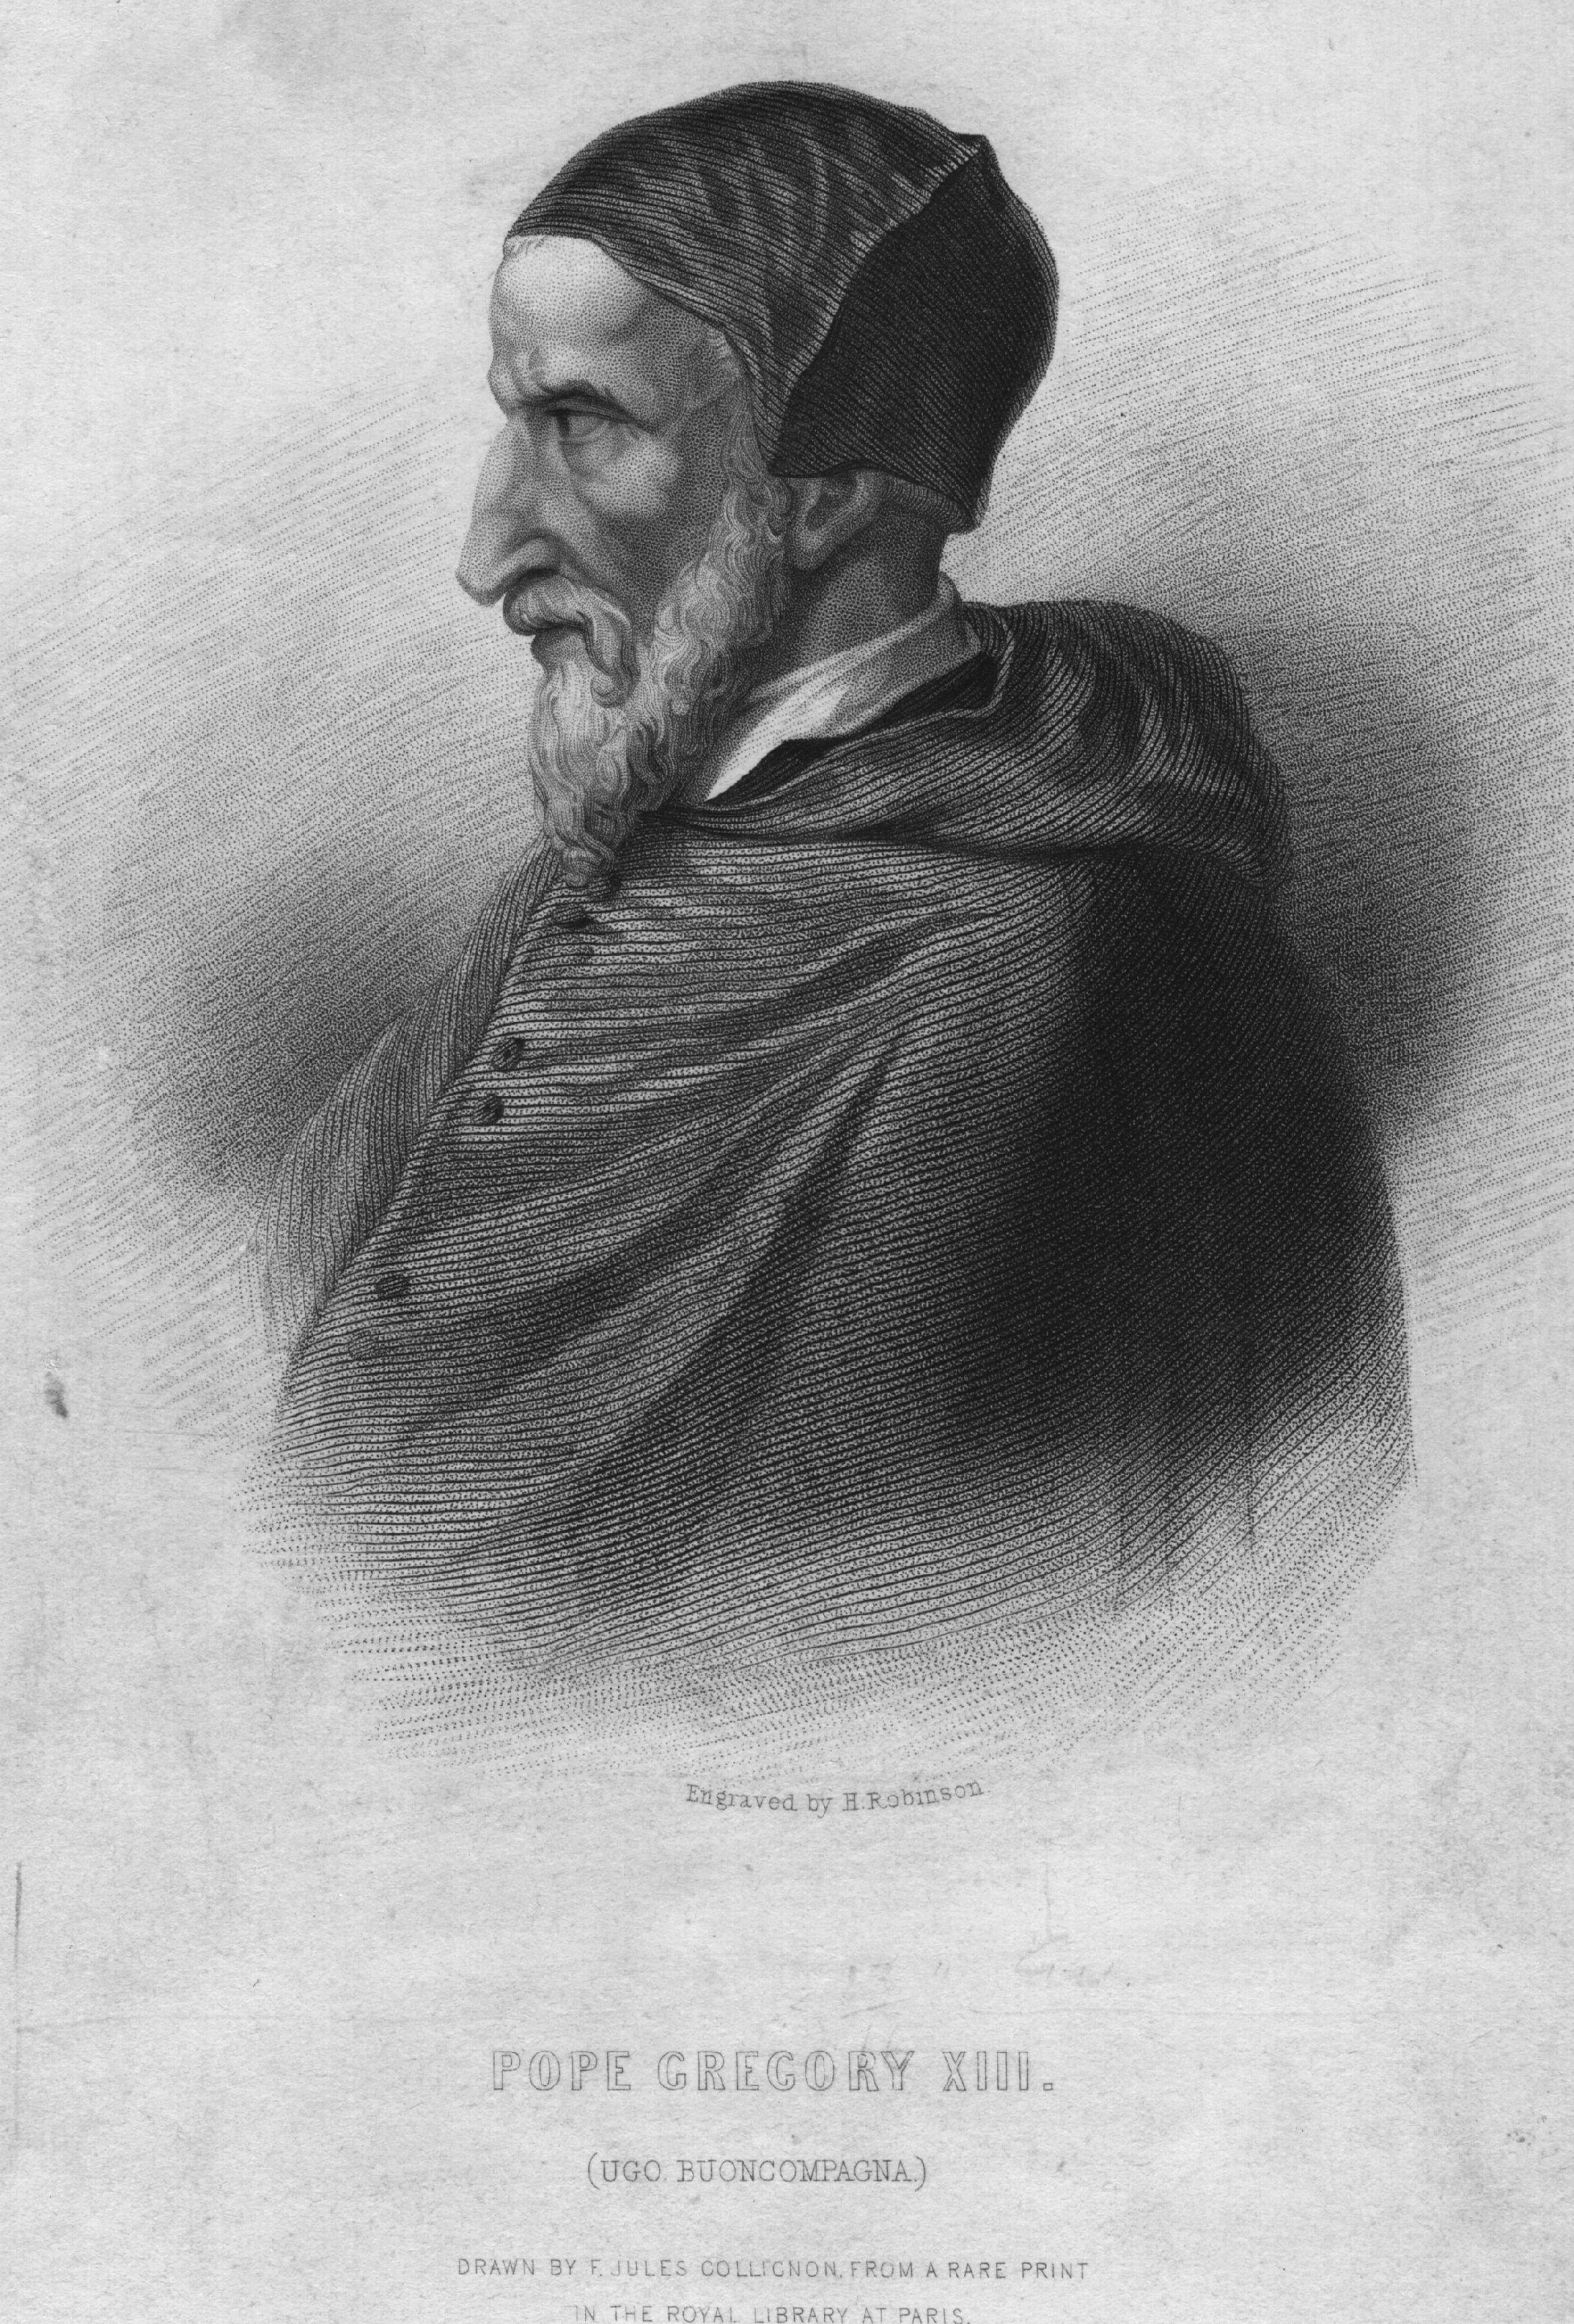 Circa 1580, Pope Gregory XIII. He introduced the reformed Gregorian calendar. (Photo by Hulton Archive/Getty Images)